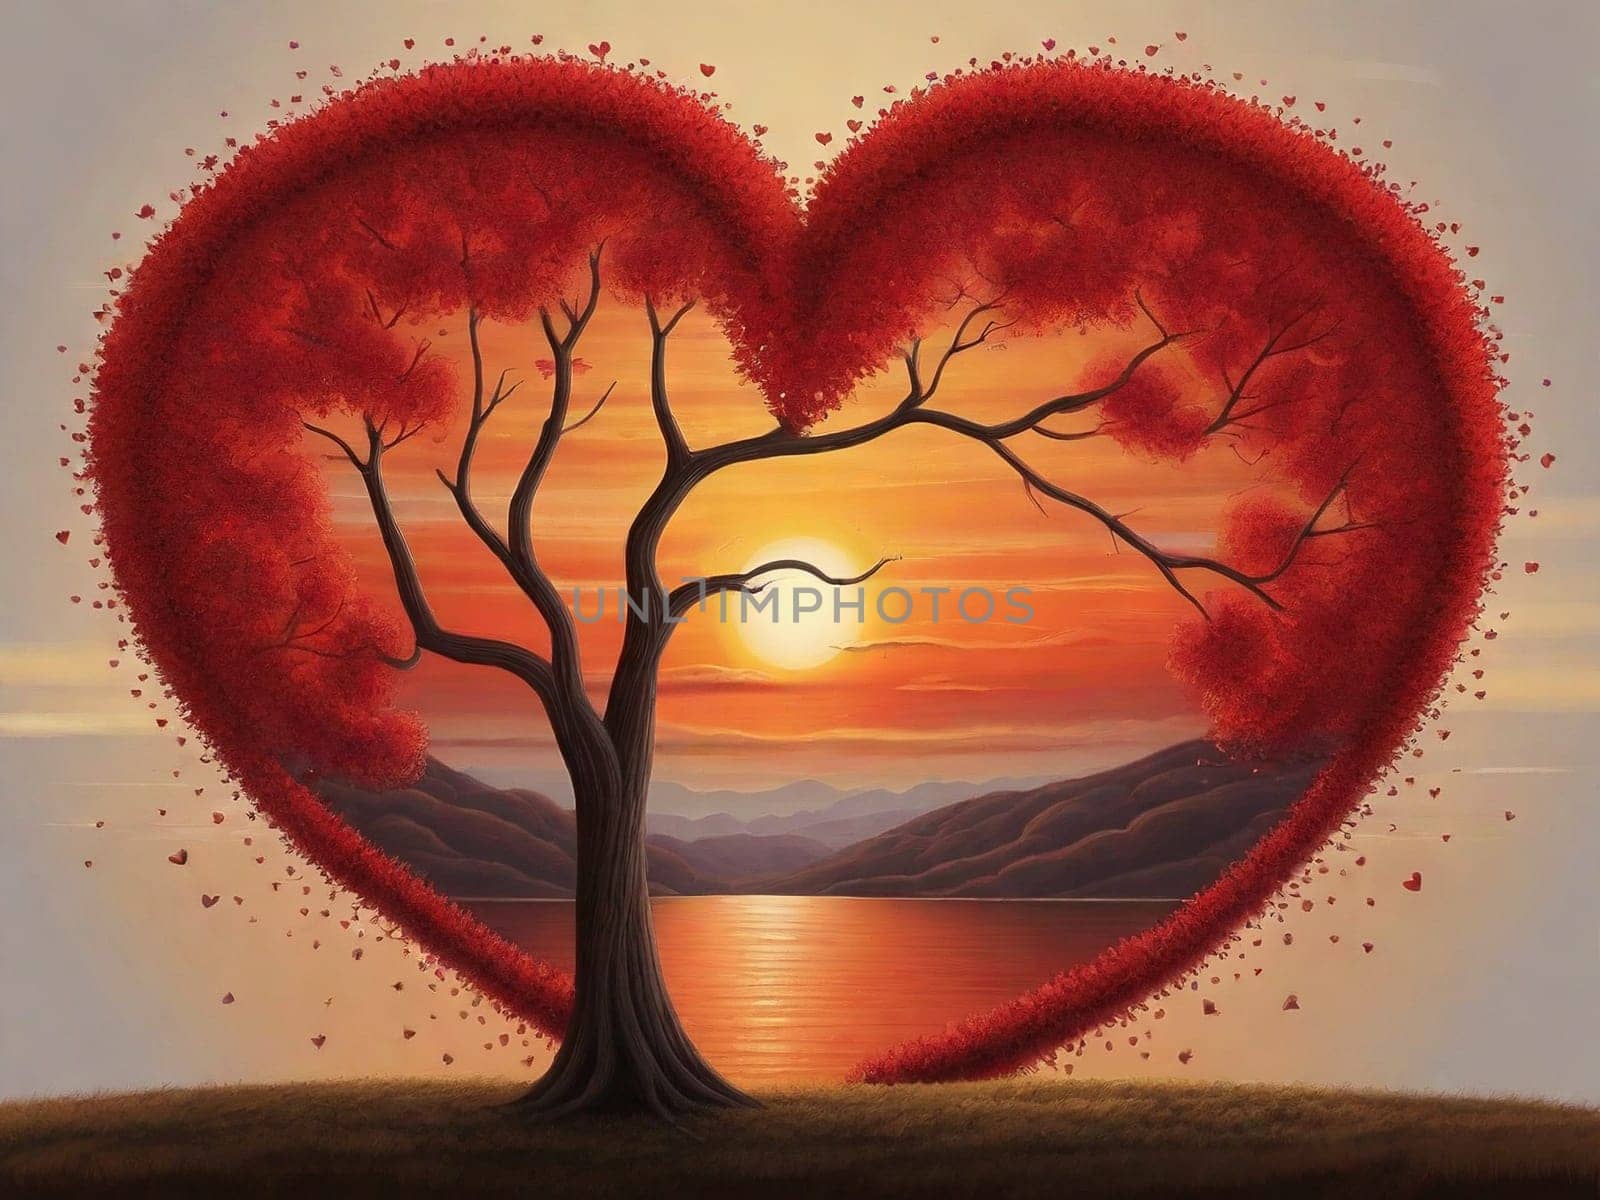 Love tree. Landscape with trees in shape red heart at sunset. Valentine's Day background.